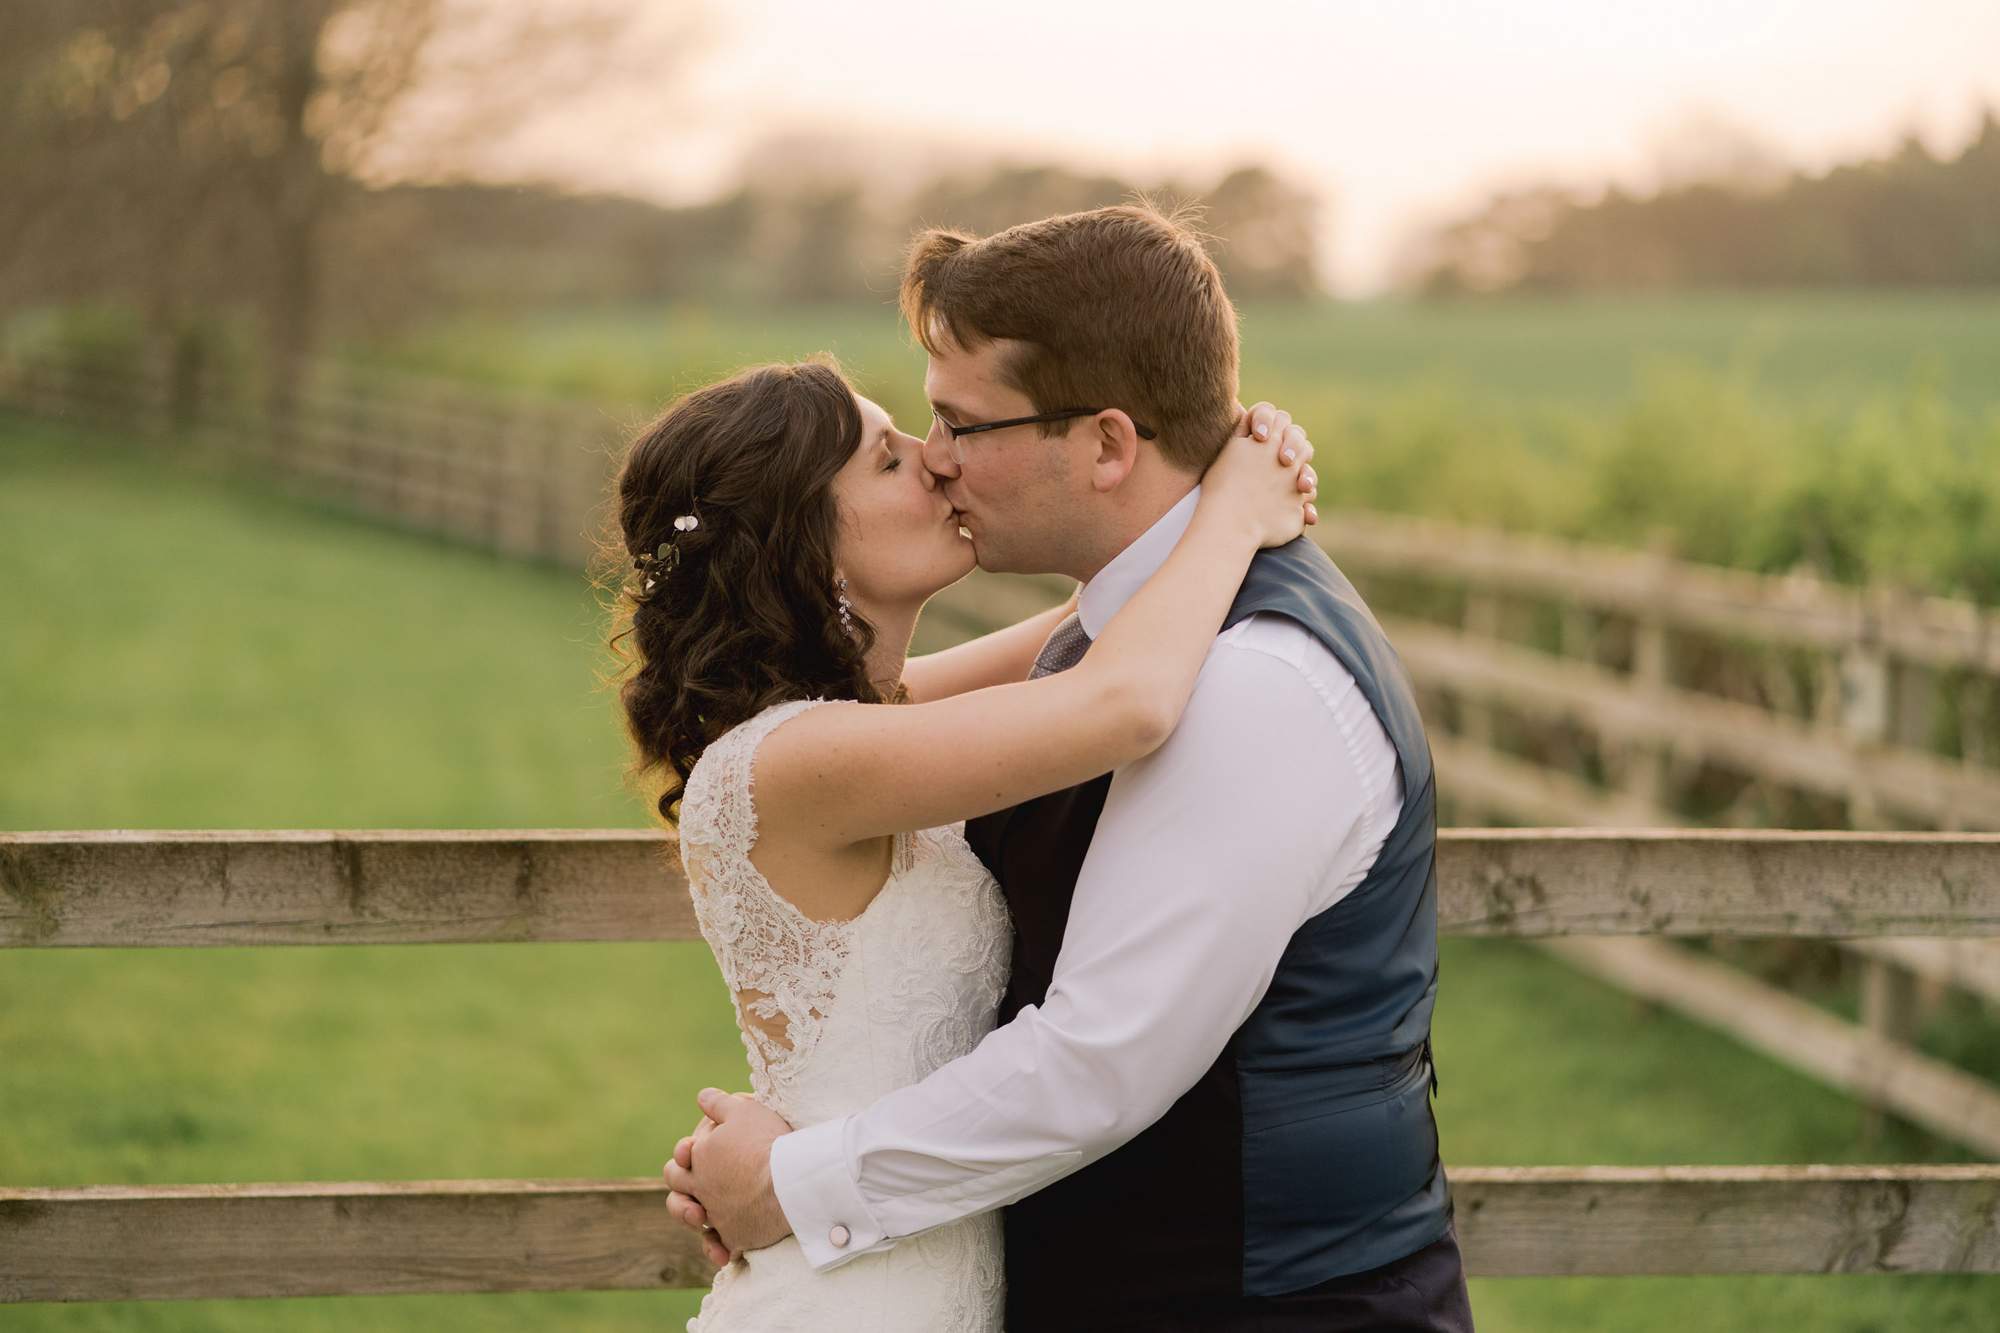 Bride and groom kiss on their wedding day at Swallows Nest Barn in Warwickshire.